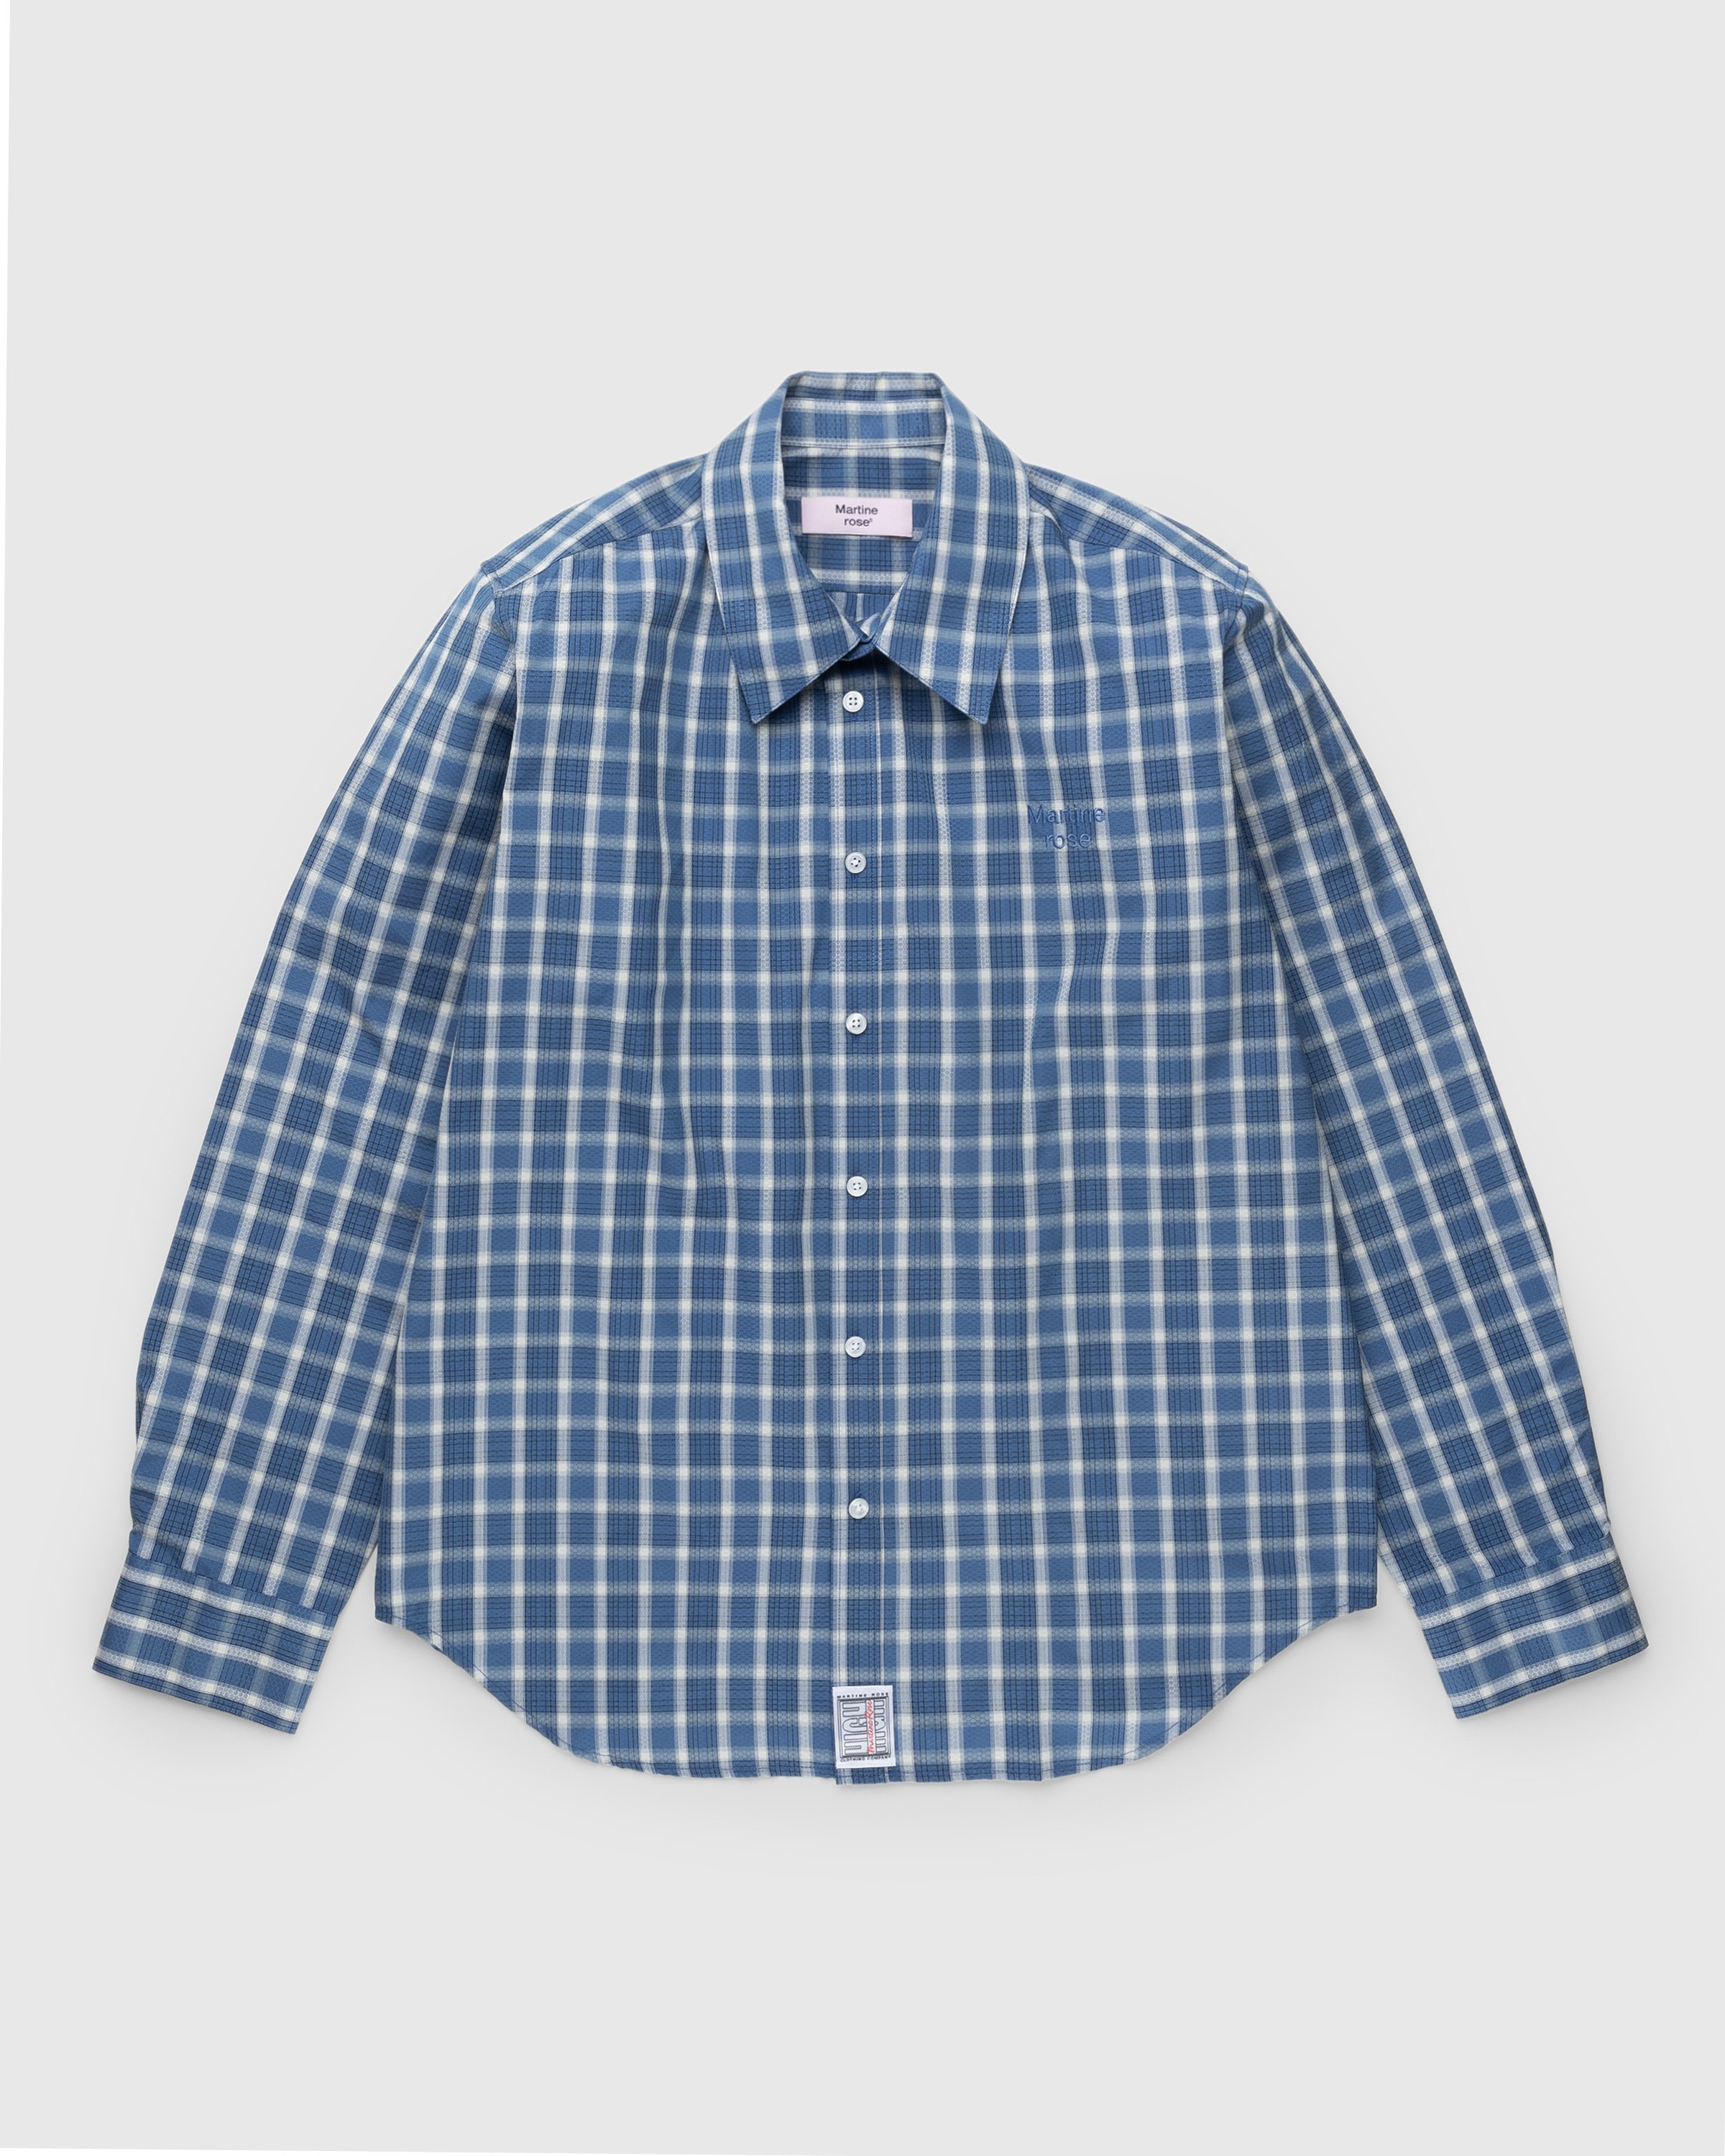 Martine Rose - Classic Check Button-Down Shirt Blue - Clothing - Blue - Image 1